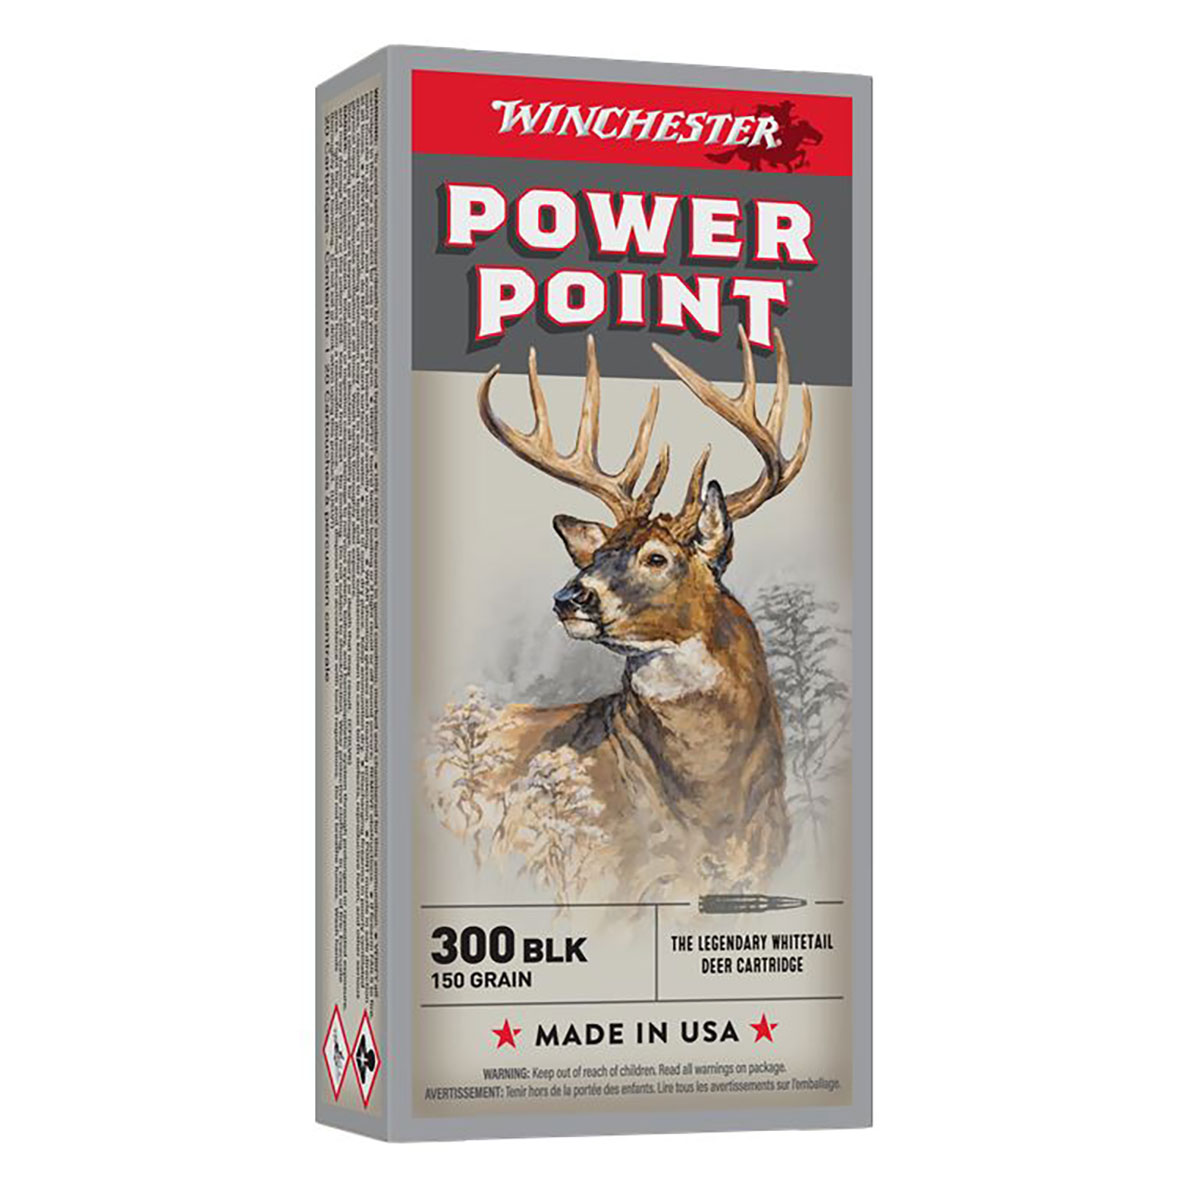 WINCHESTER - POWER POINT 300 BLACKOUT RIFLE AMMO